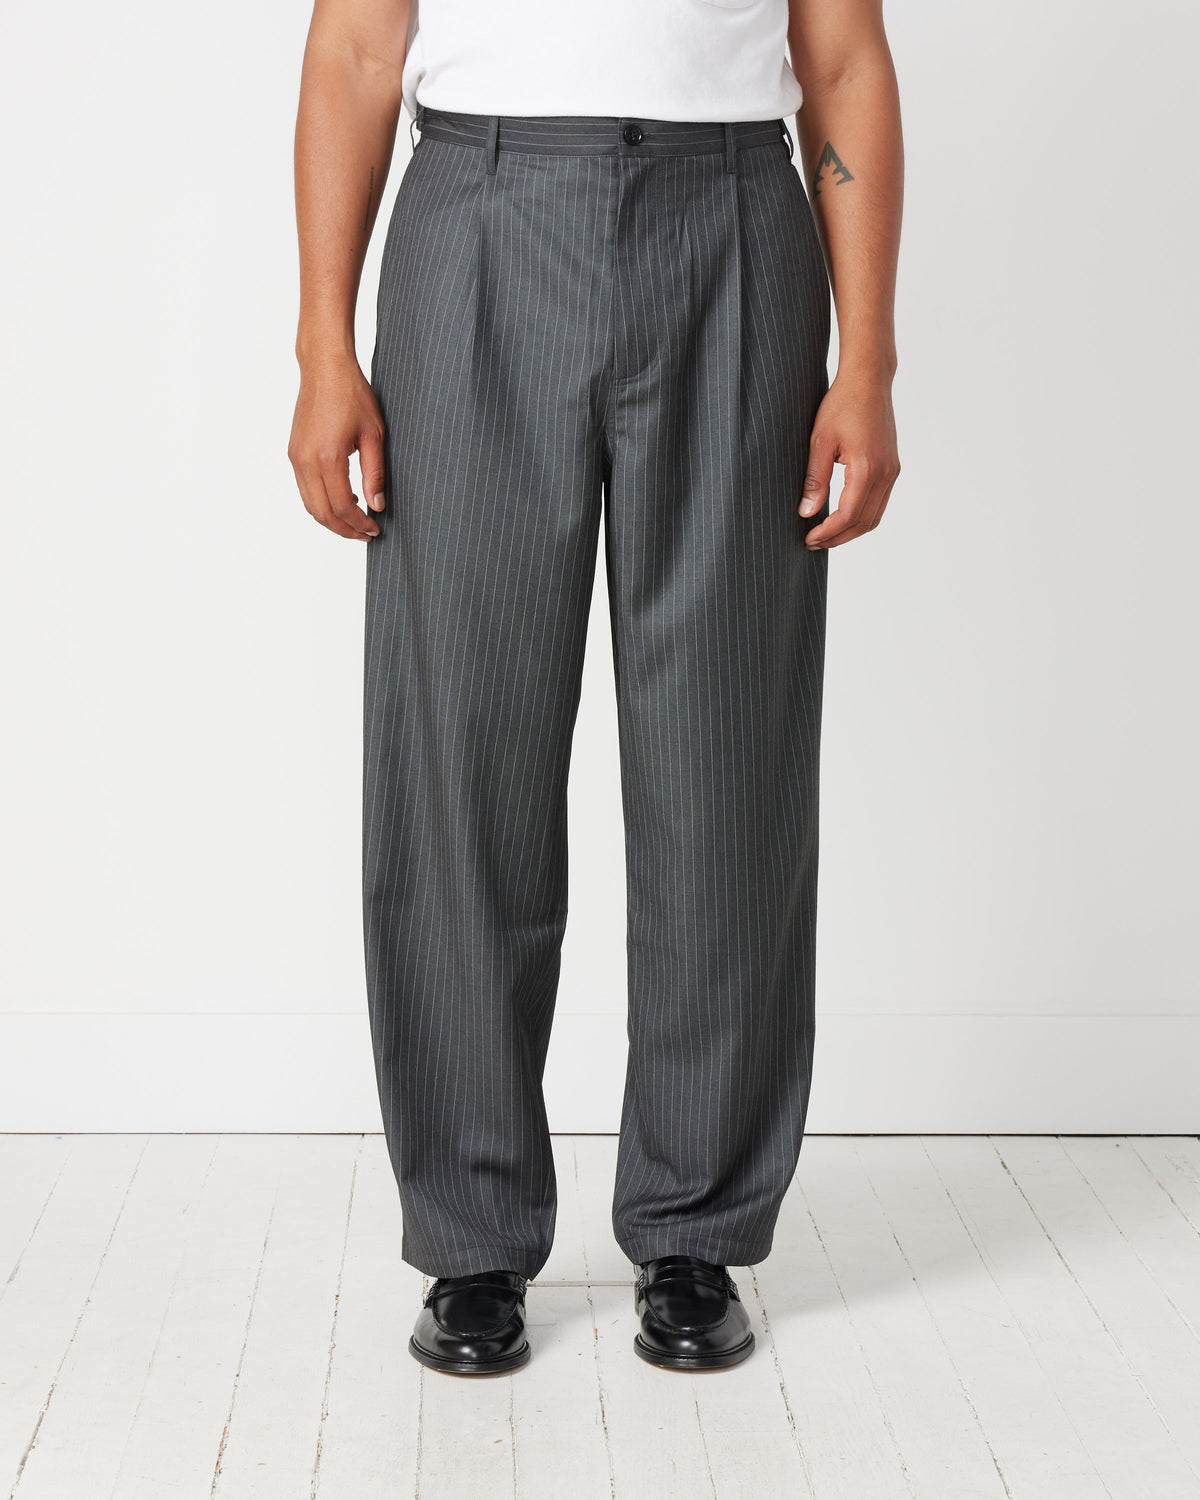 Browse Stripe Volume Pleated Trouser Stussy & More. Shop at our